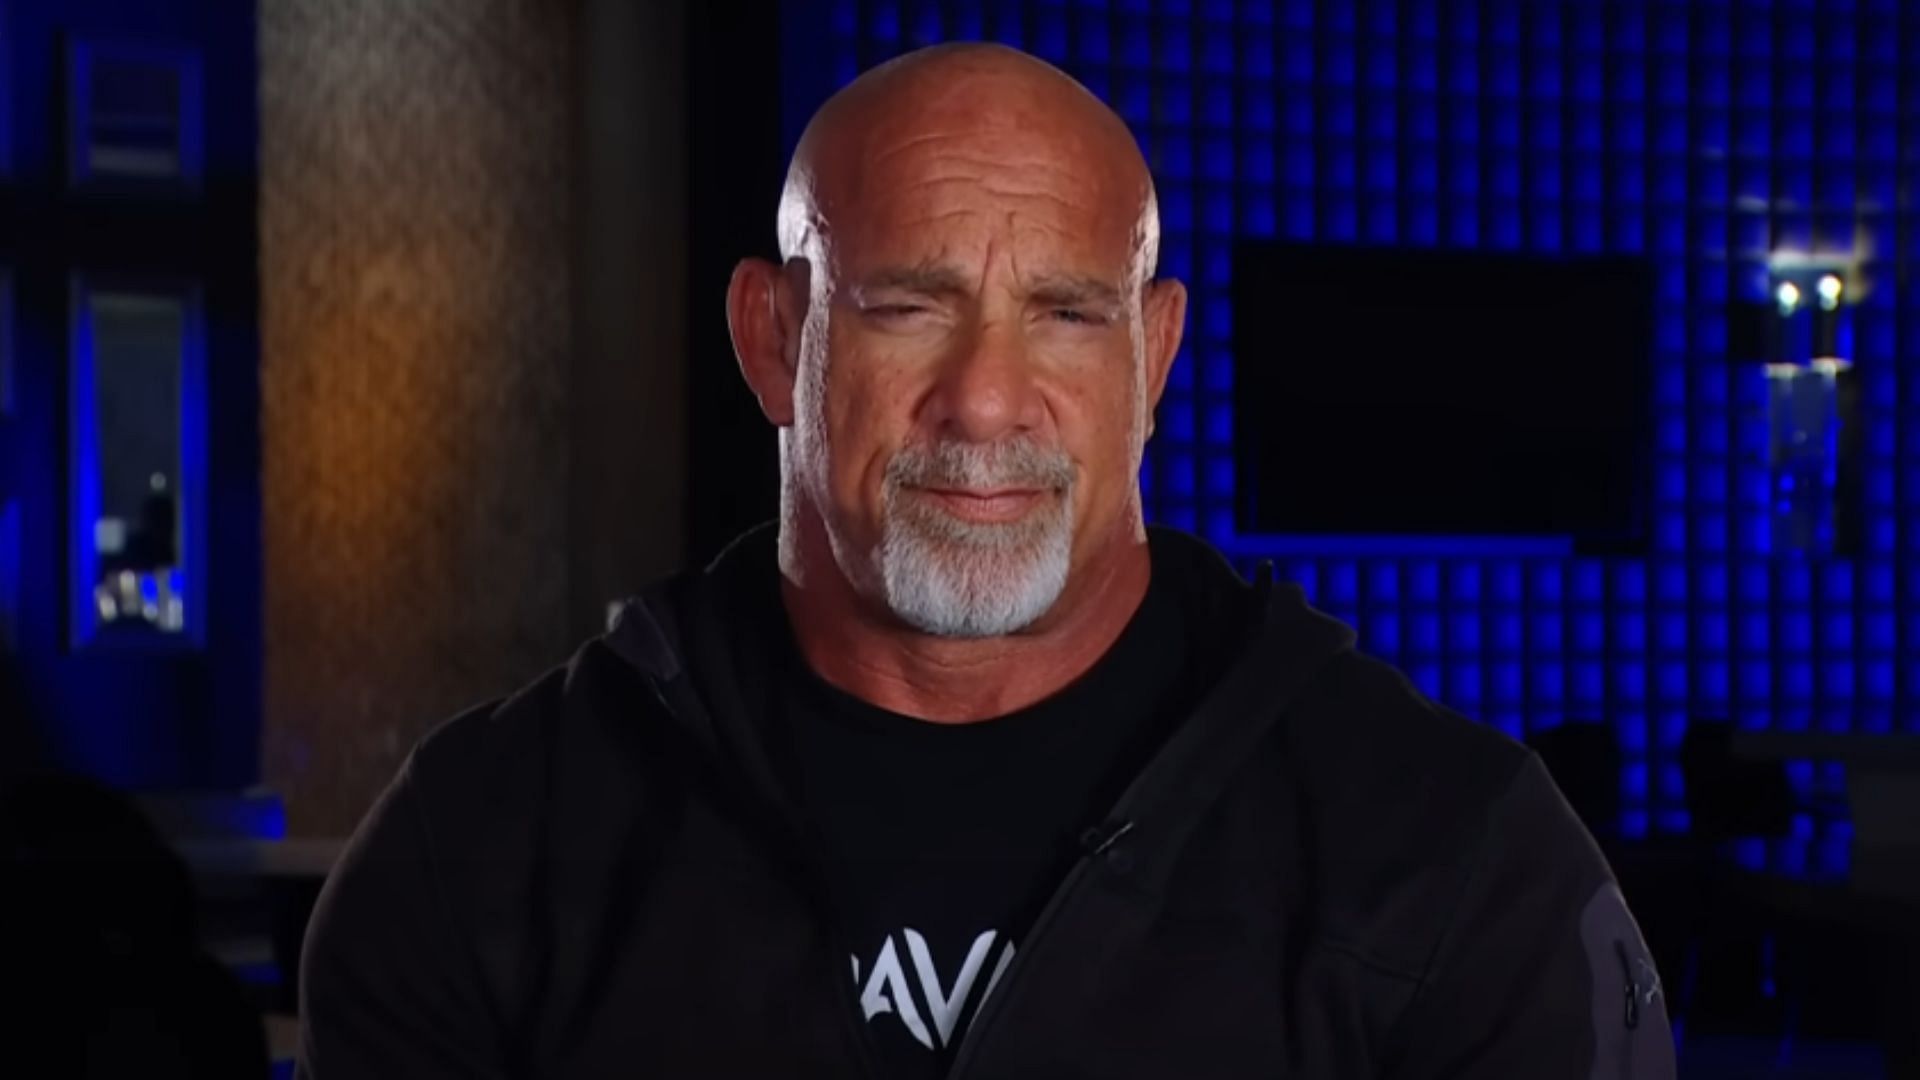 Goldberg has not wrestled since losing to Roman Reigns in February 2022.